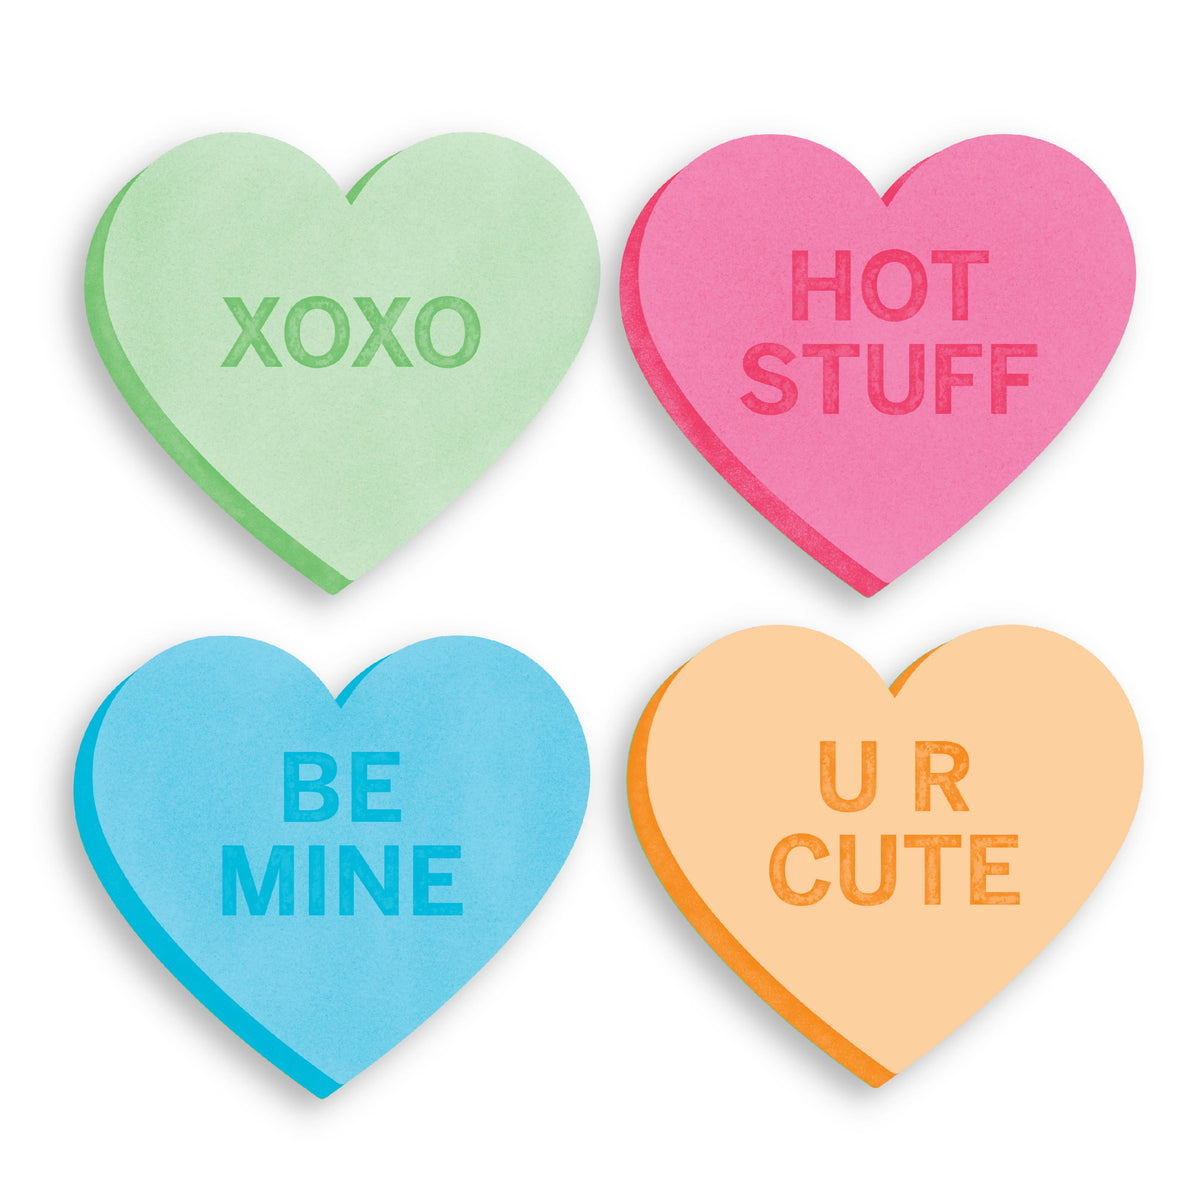 Conversation Hearts Set of 4 Coasters | Tart by Taylor